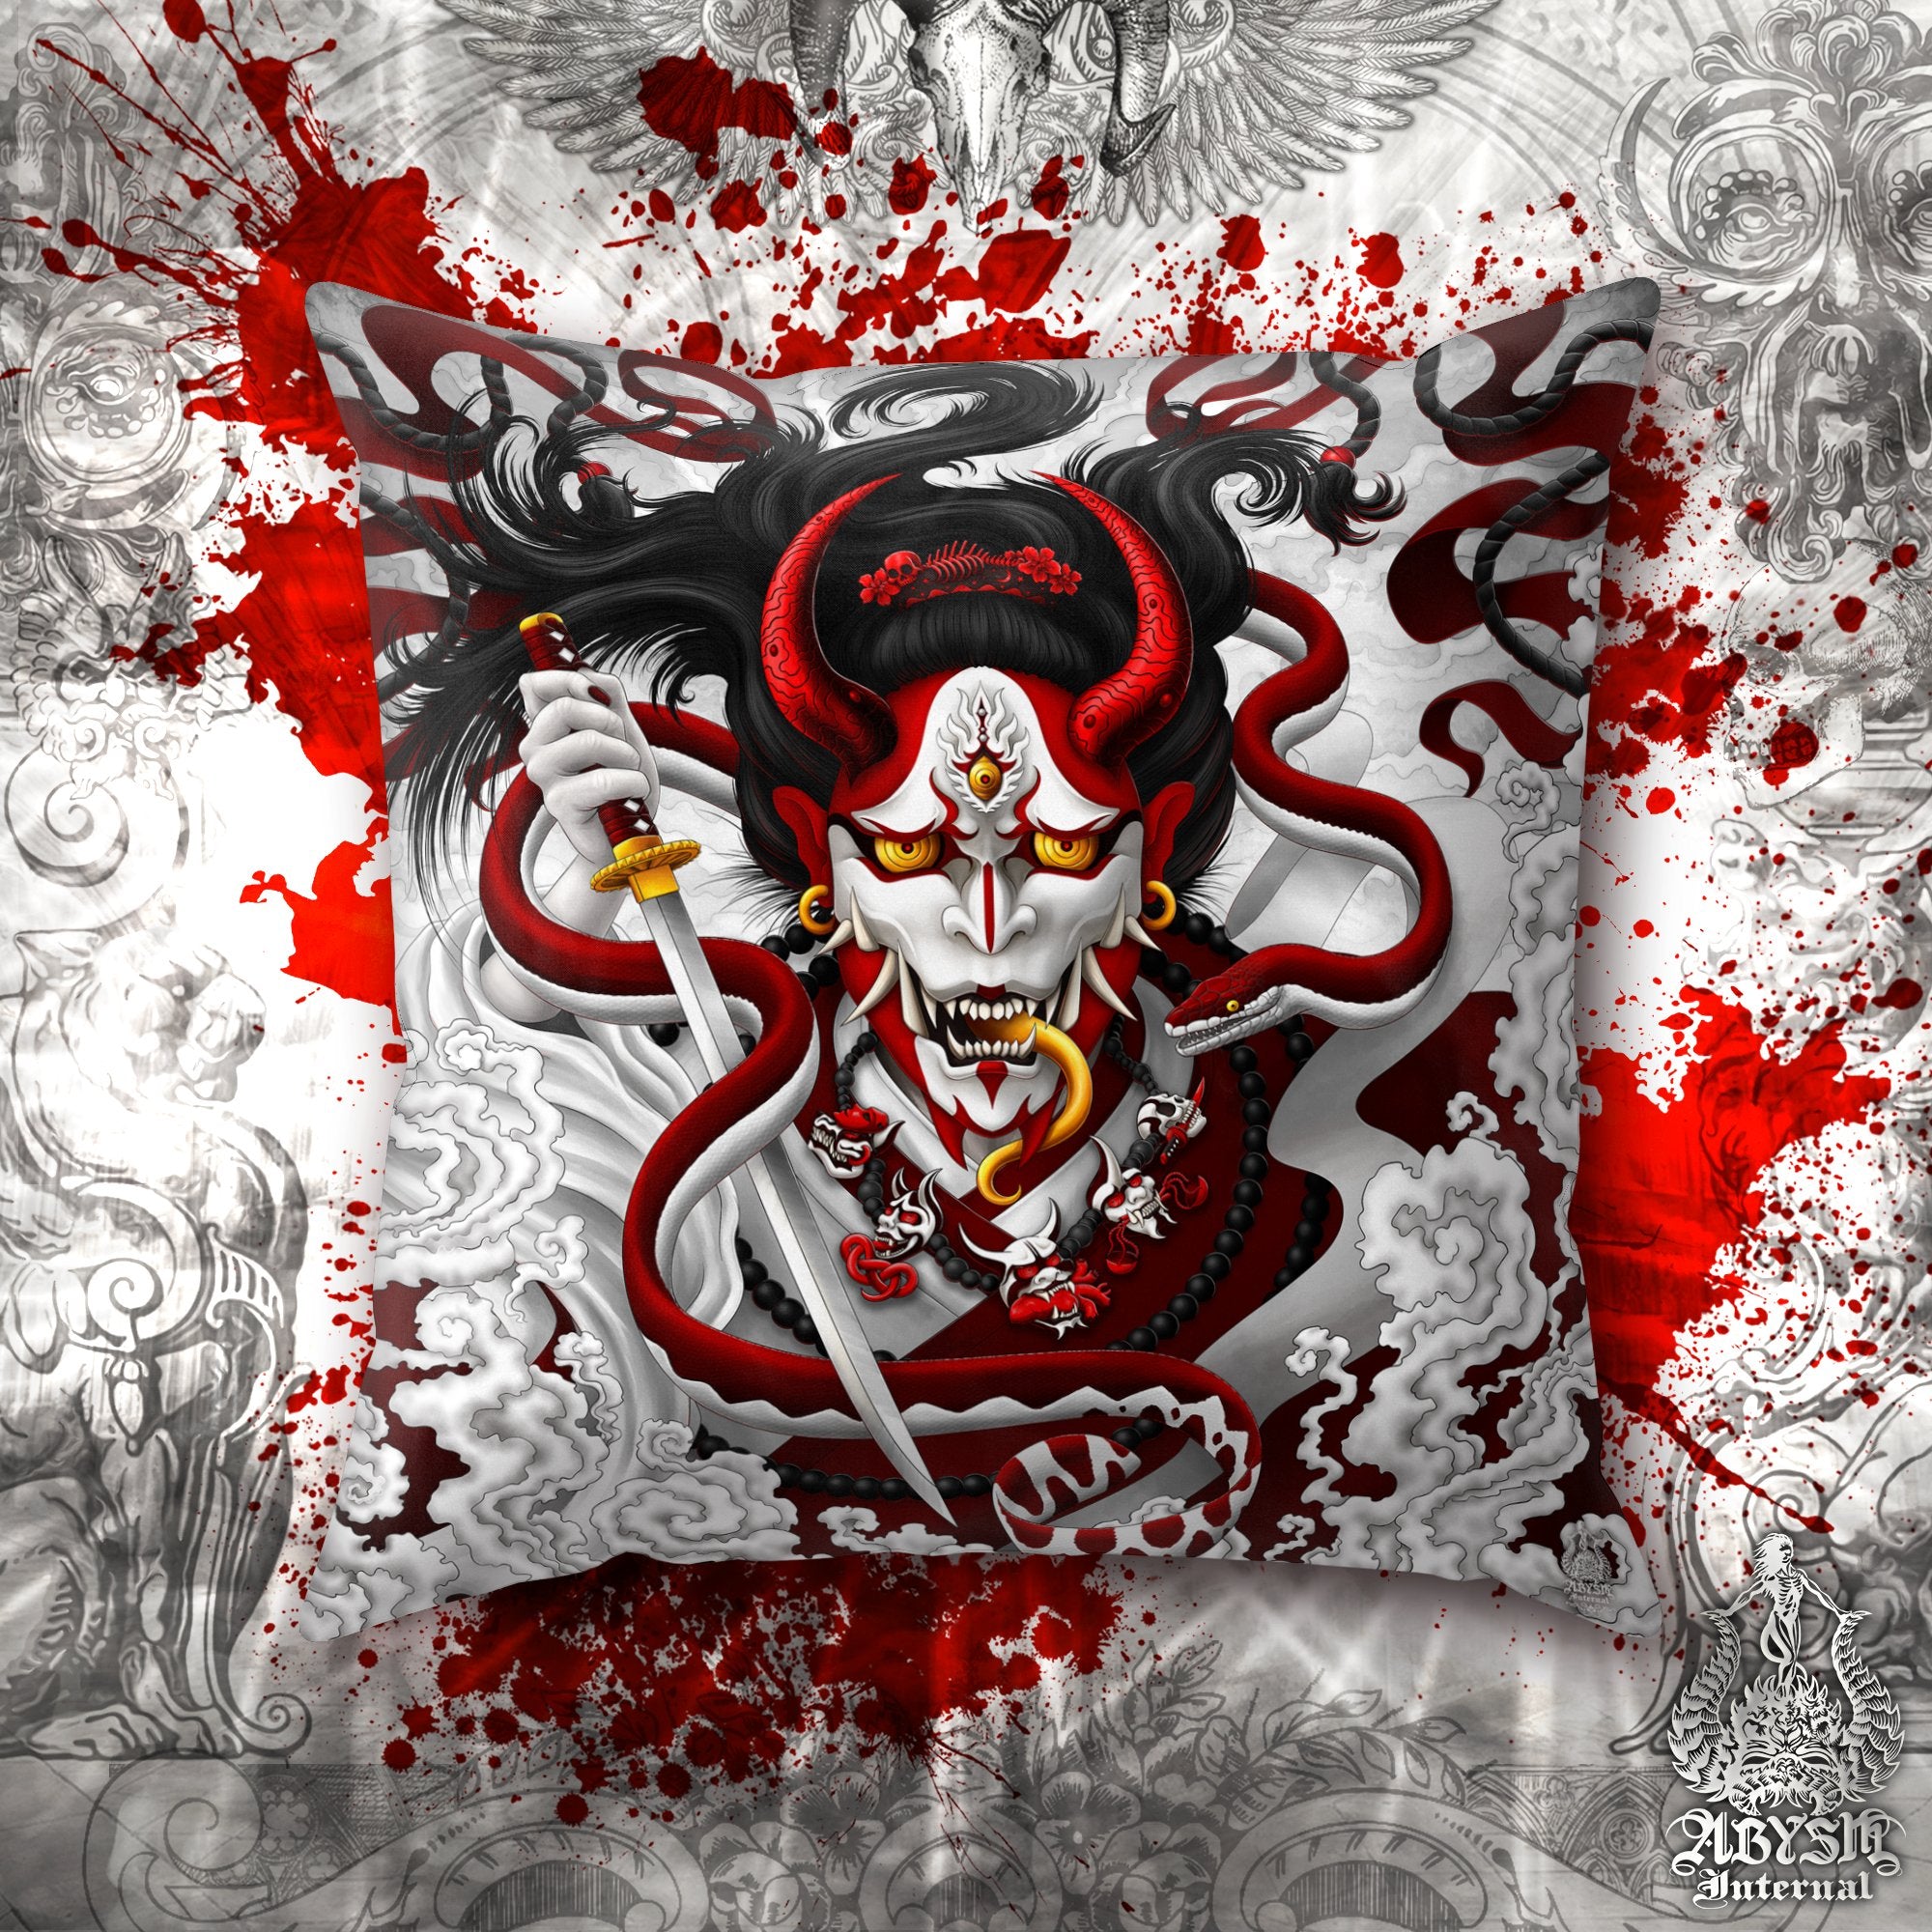 White Goth Hannya Throw Pillow, Decorative Accent Pillow, Square Cushion Cover, Japanese Demon & Red Snake, Anime Room Decor - Abysm Internal